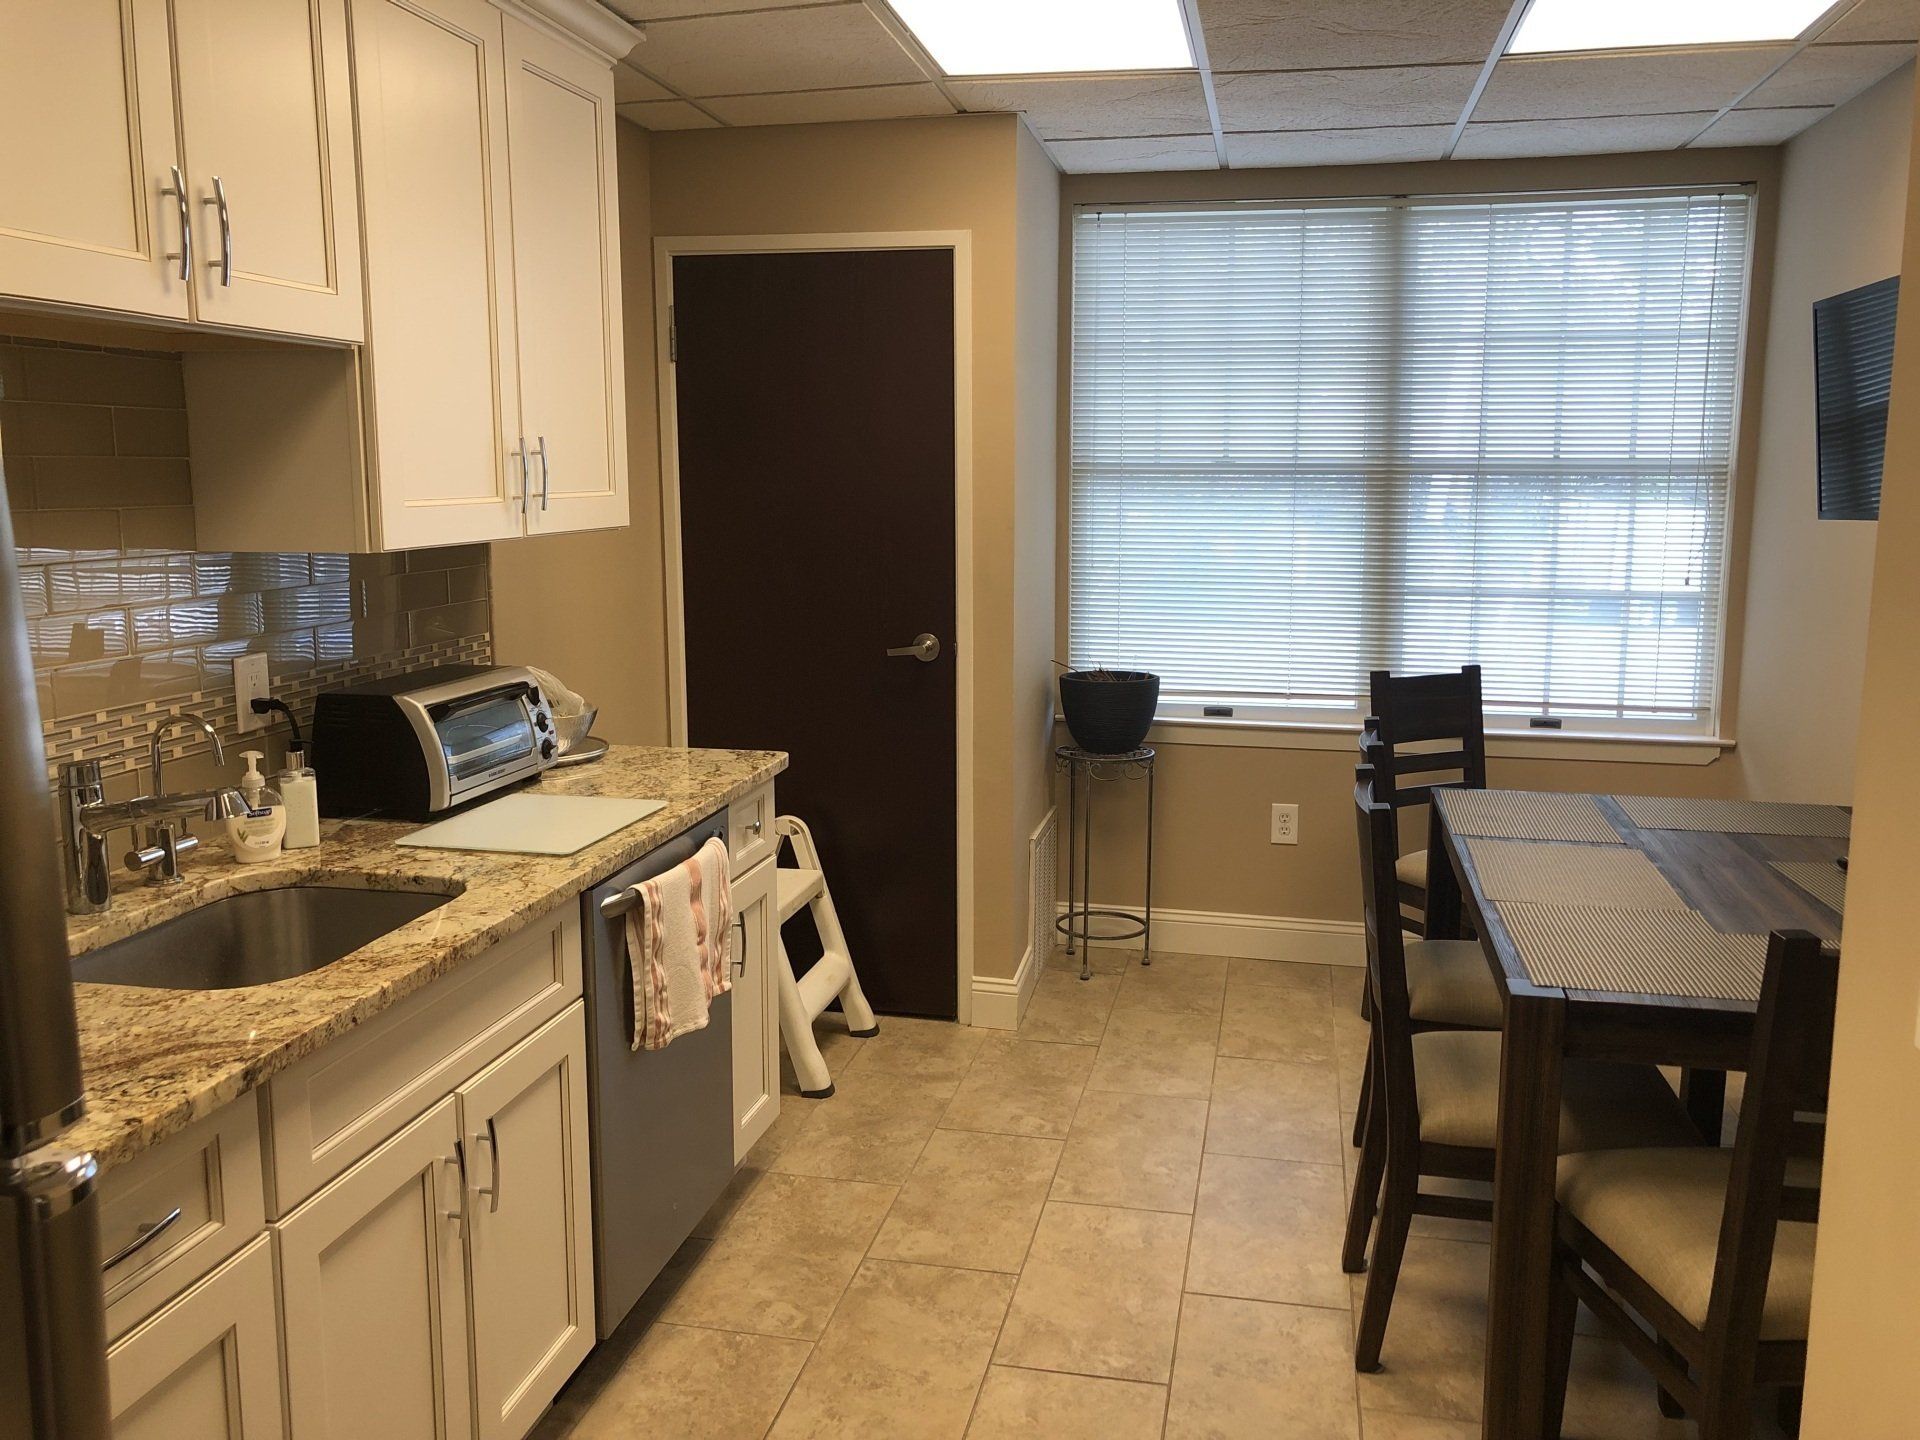 Fairfield Kitchen — Clifton, NJ — Evergreen Commercial Real Estate Brokers Inc